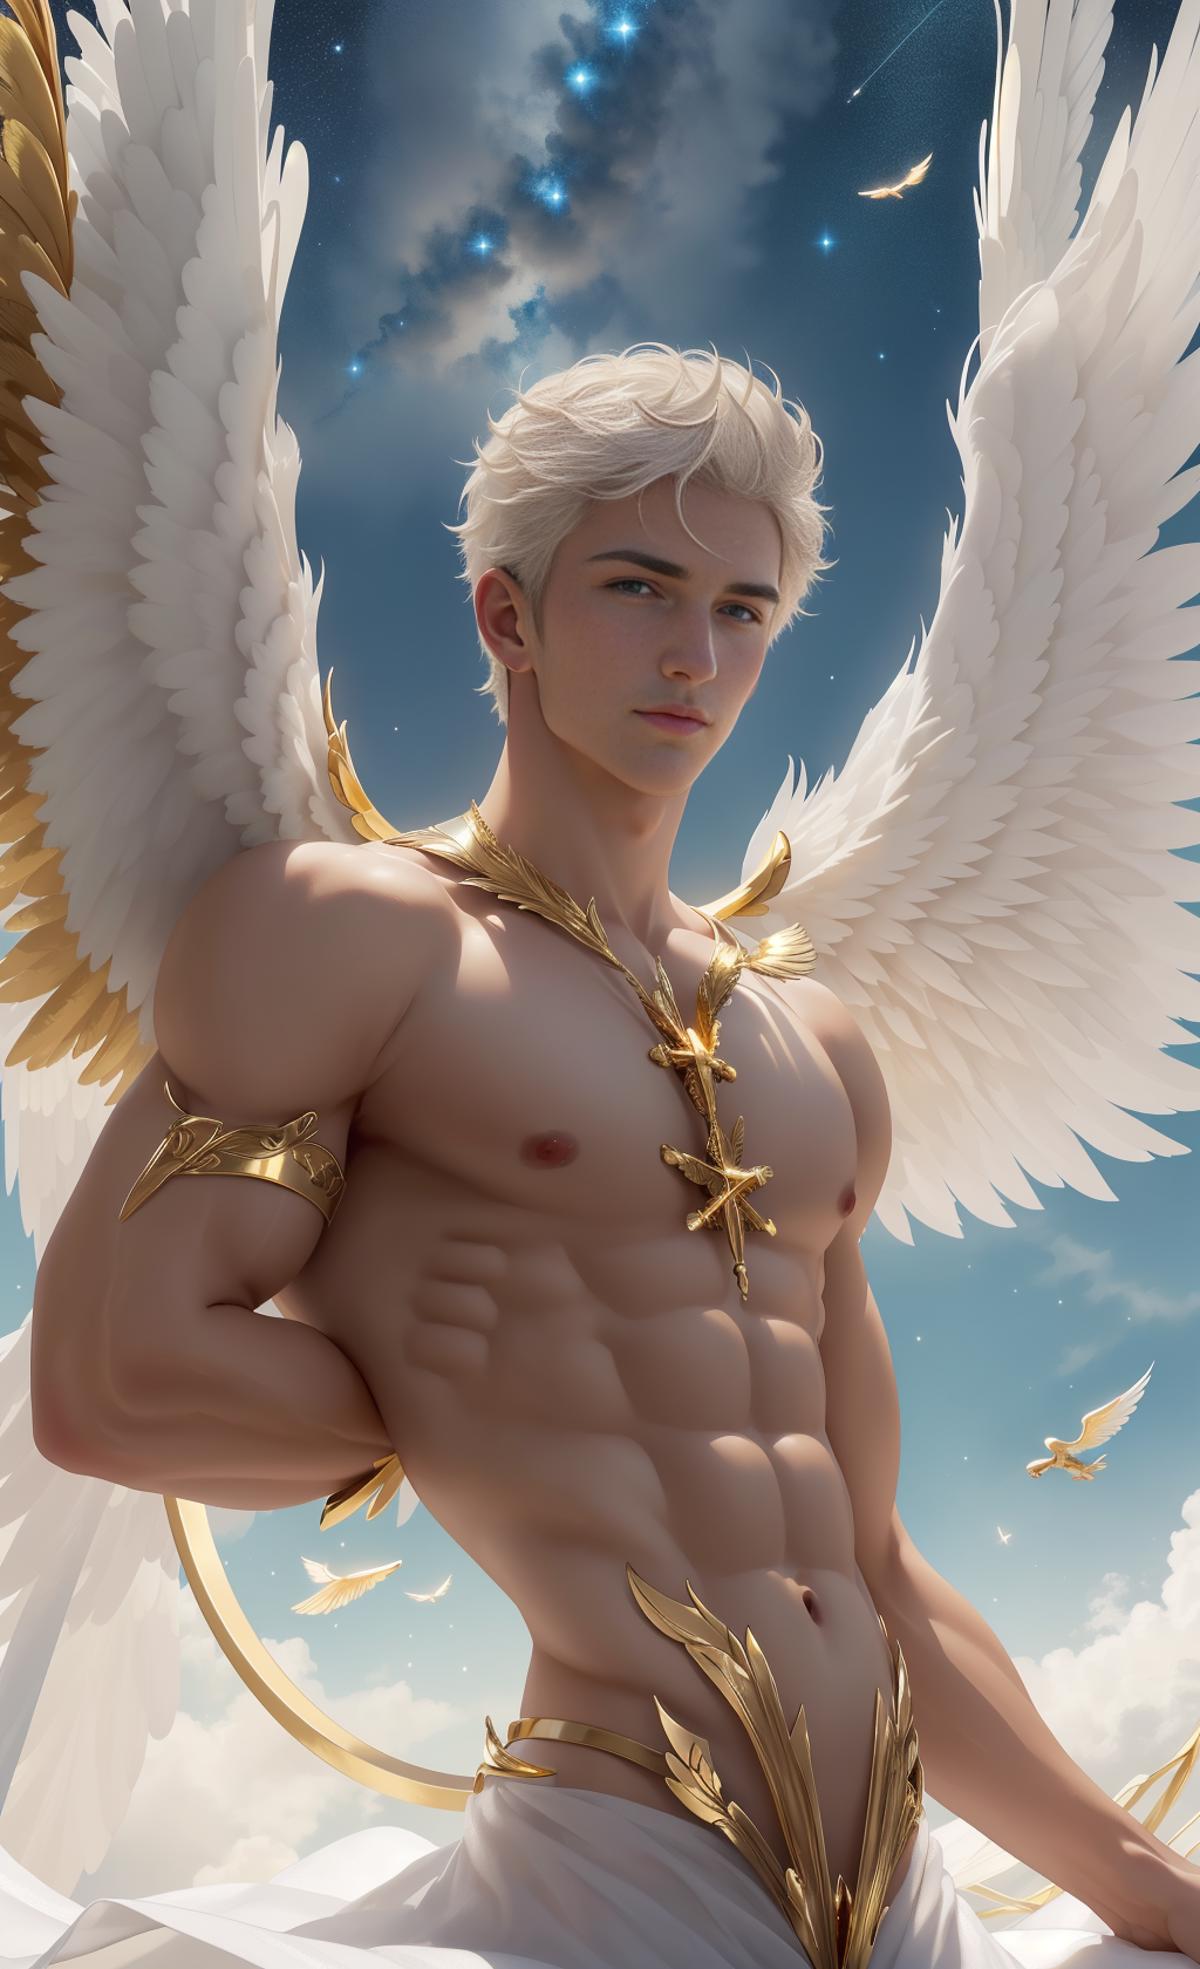 Digital art of a muscular man with white hair, wings, and a golden necklace.